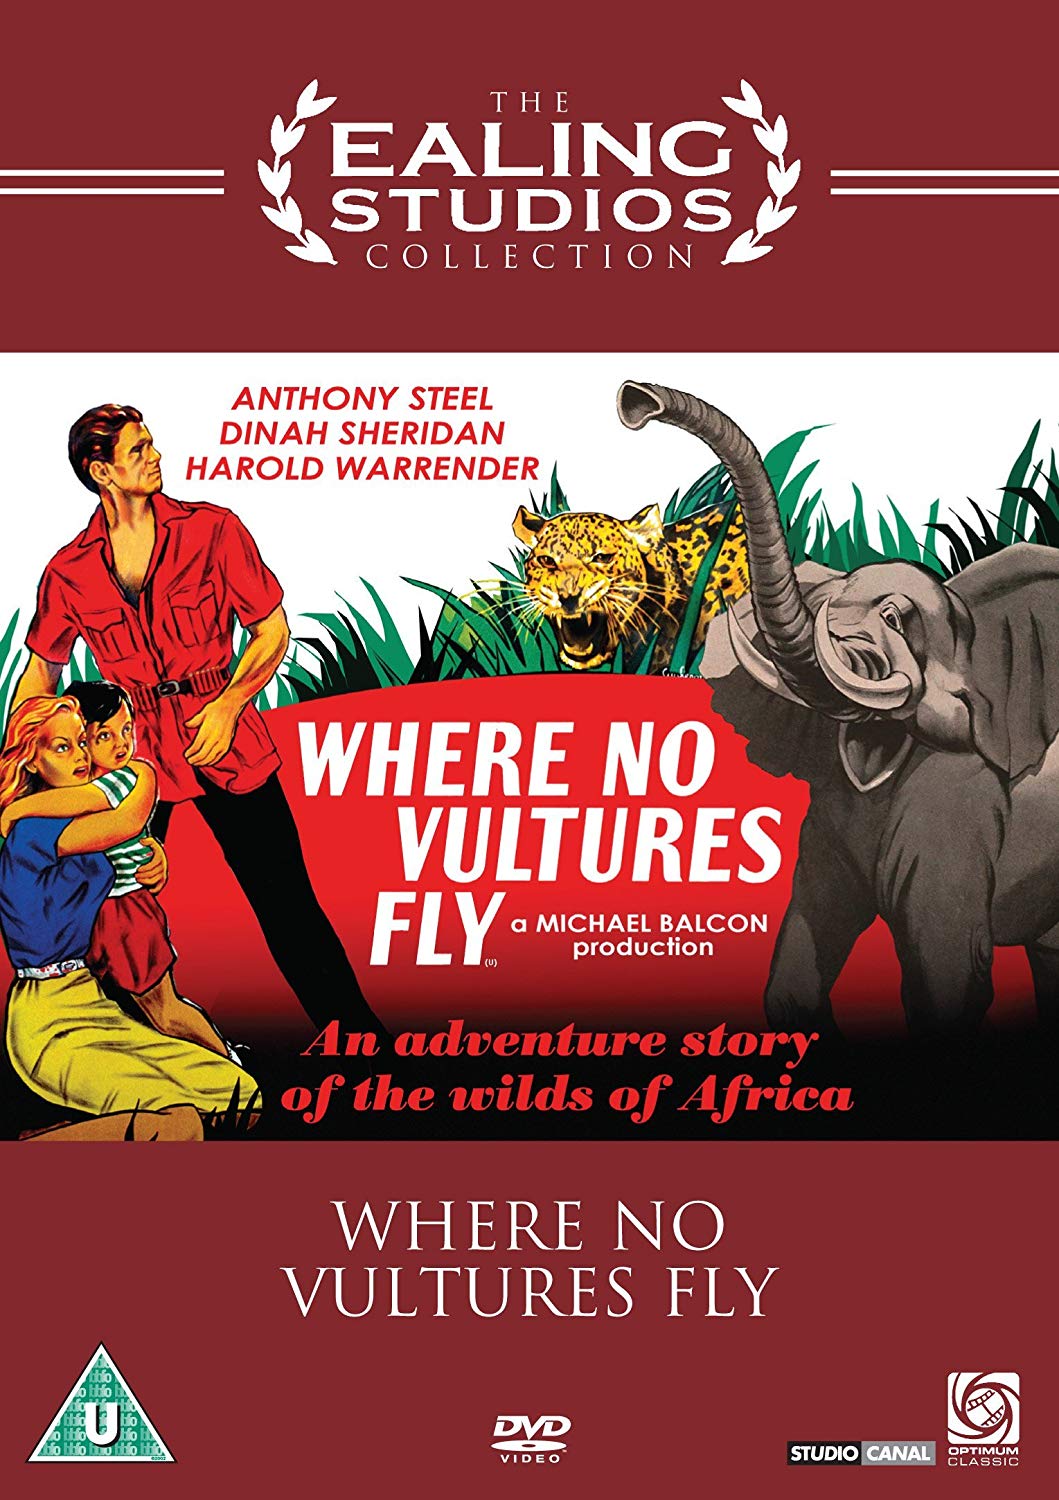 Where No Vultures Fly (DVD)